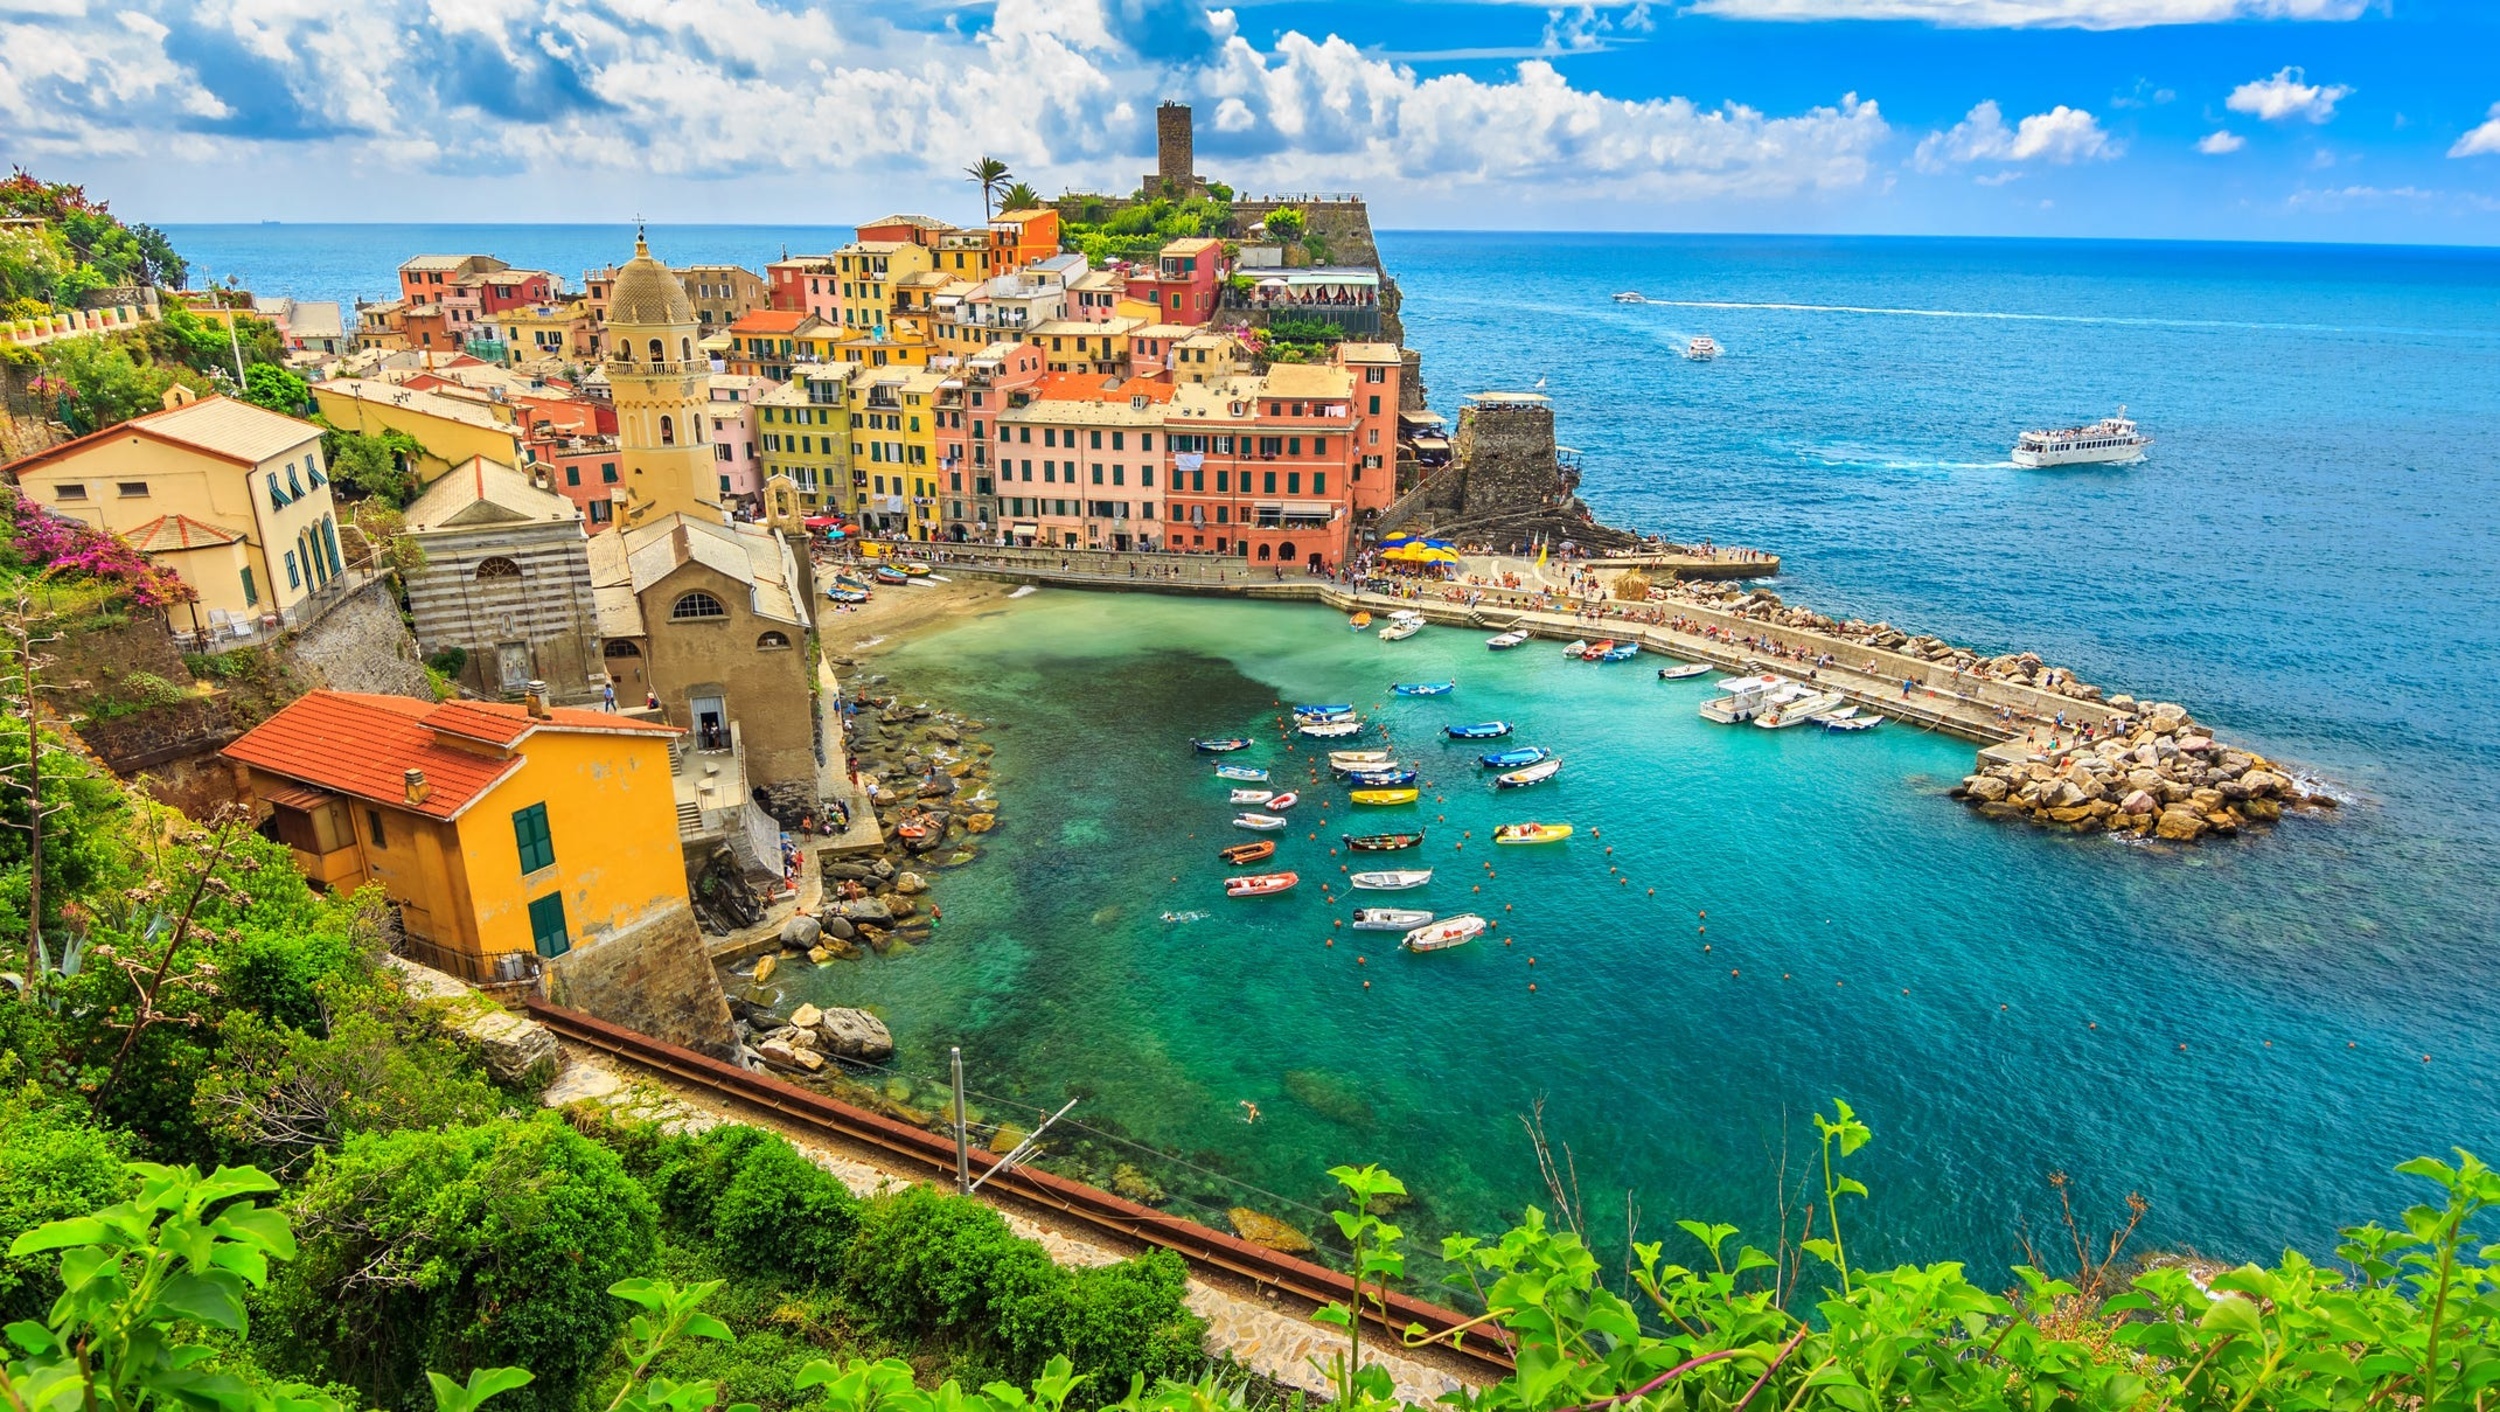 <p>One of Italy's most famous stretches of coast, Cinque Terre has been luring travelers and locals for centuries with its deep waters and bubblegum villas. You probably know at least one person who's been there. No trip to Italy is complete without it. </p><p><a href='https://www.msn.com/en-us/community/channel/vid-cj9pqbr0vn9in2b6ddcd8sfgpfq6x6utp44fssrv6mc2gtybw0us'>Follow us on MSN to see more of our exclusive lifestyle content.</a></p>